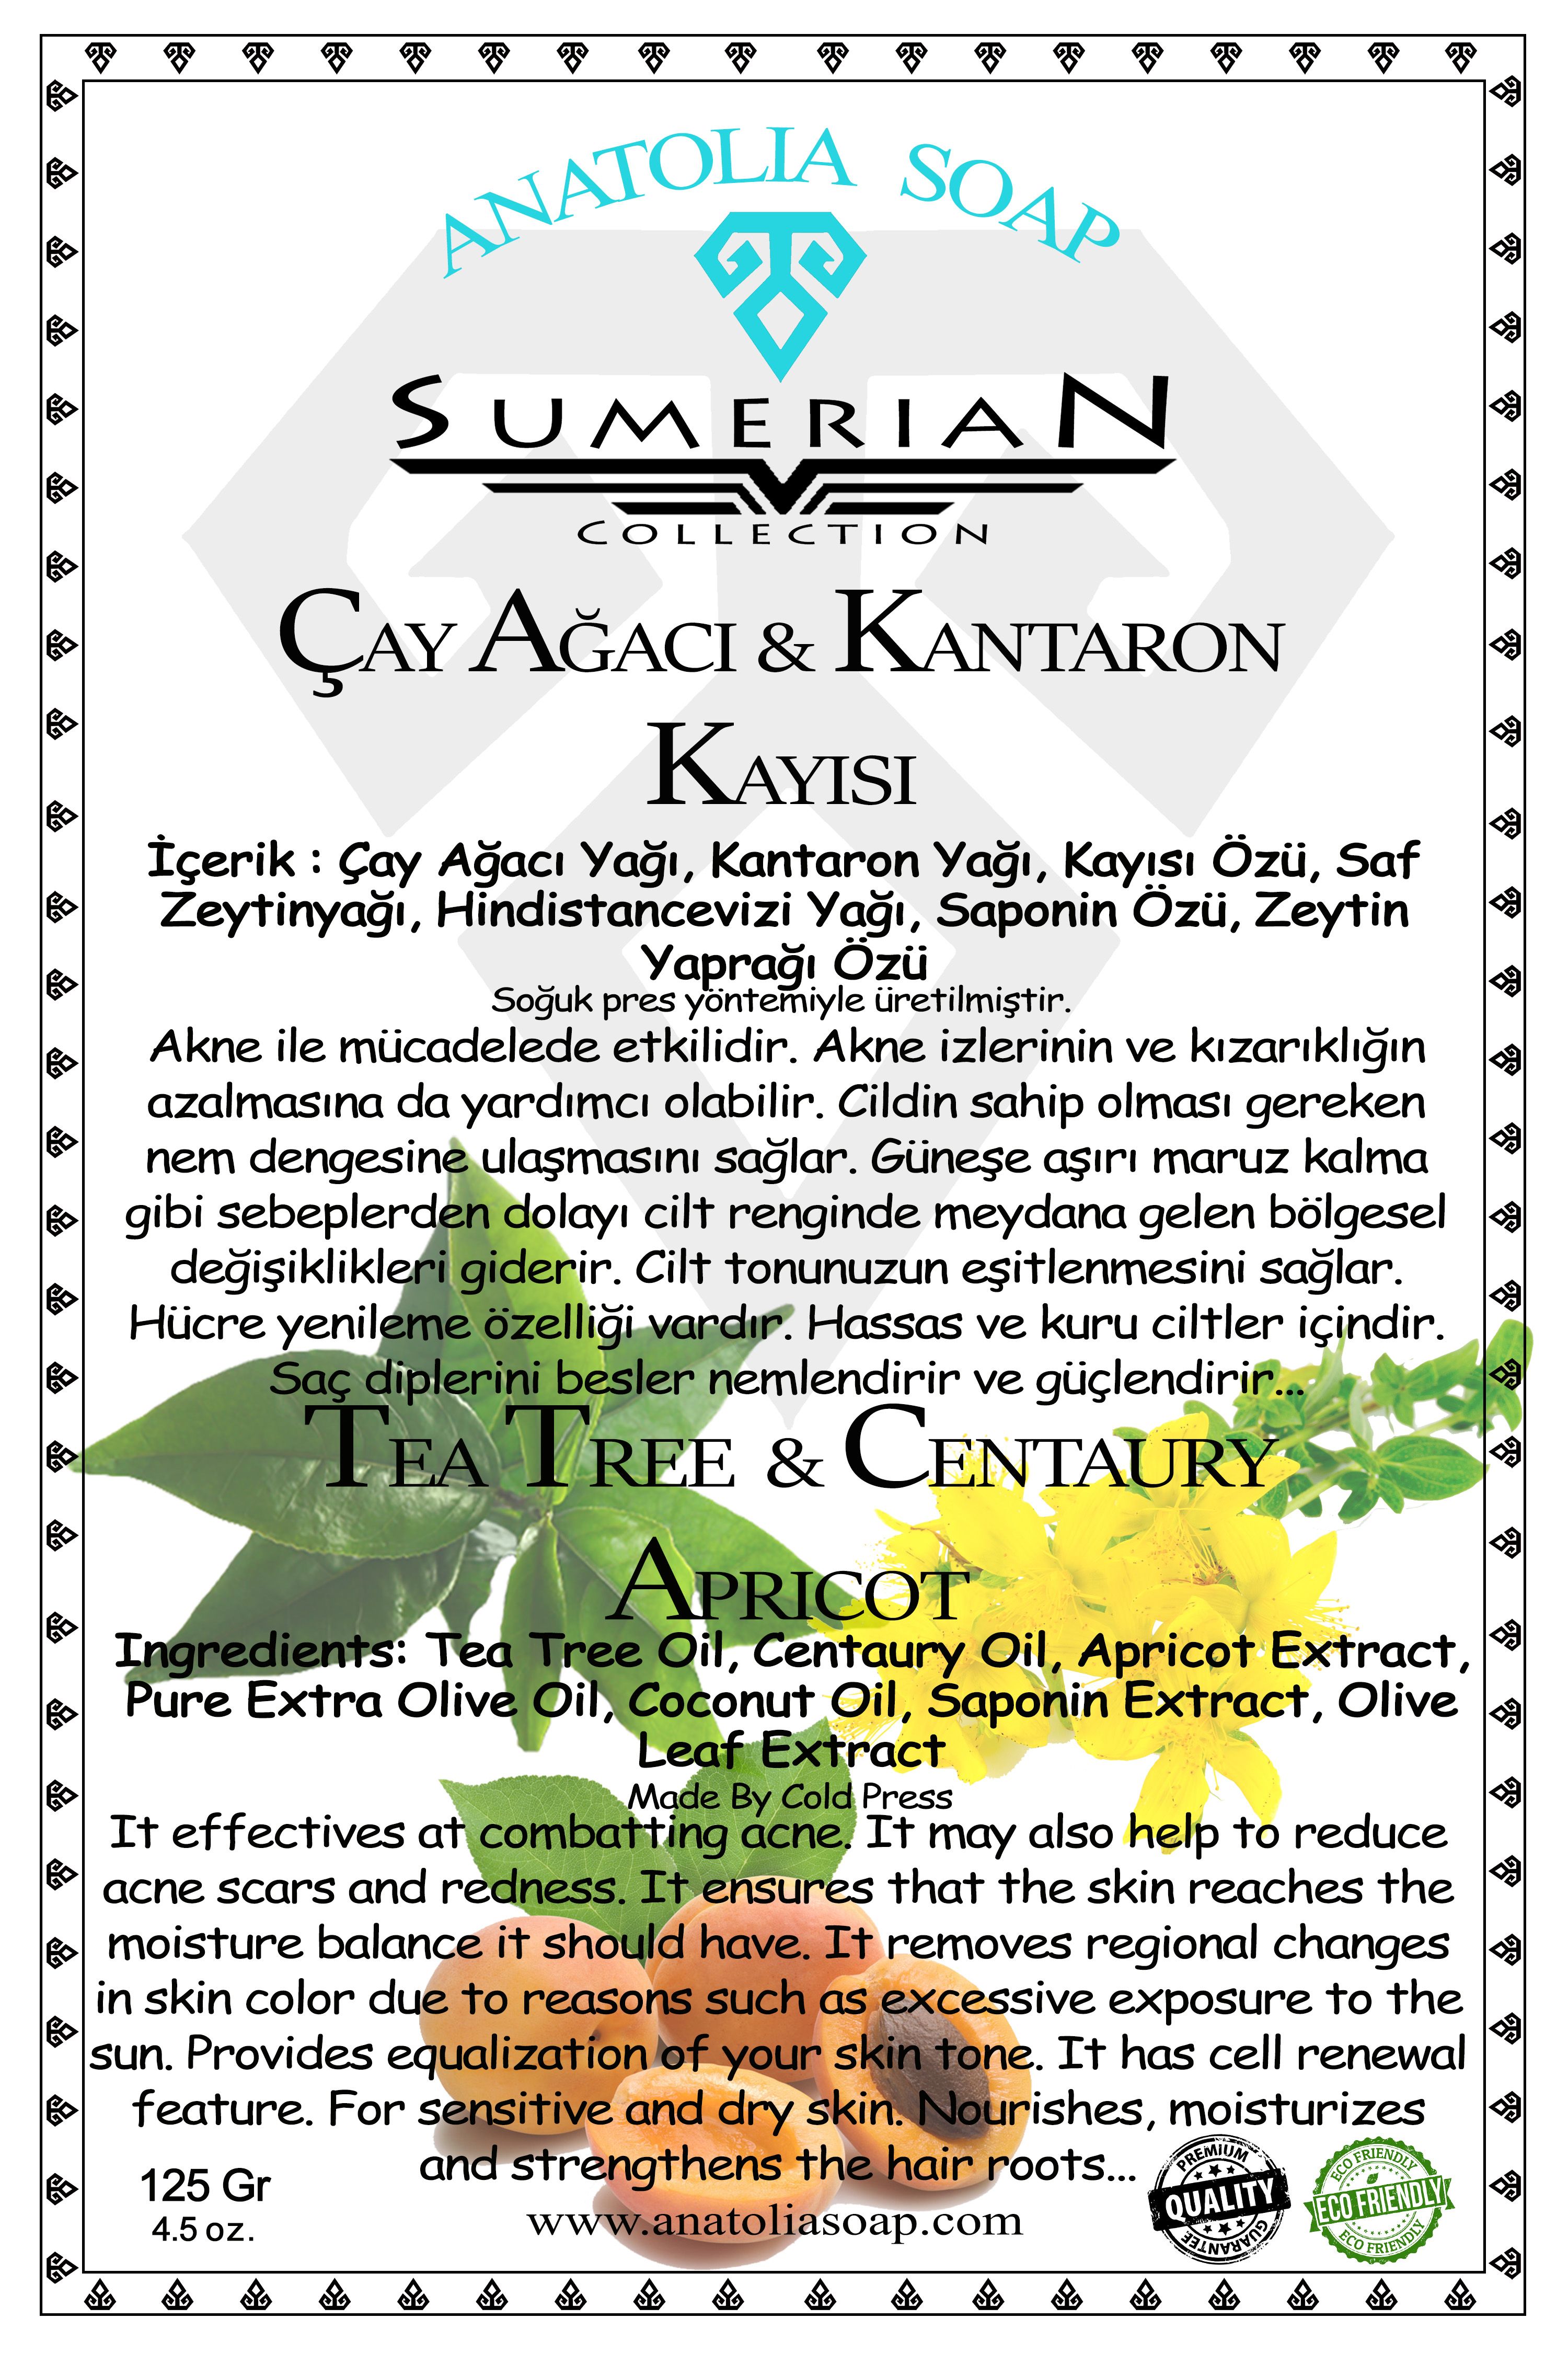 Remove Regional Color Differences on the Skin with Sumerian Collection Tea Tree St. John's Wort Apricot Soap.